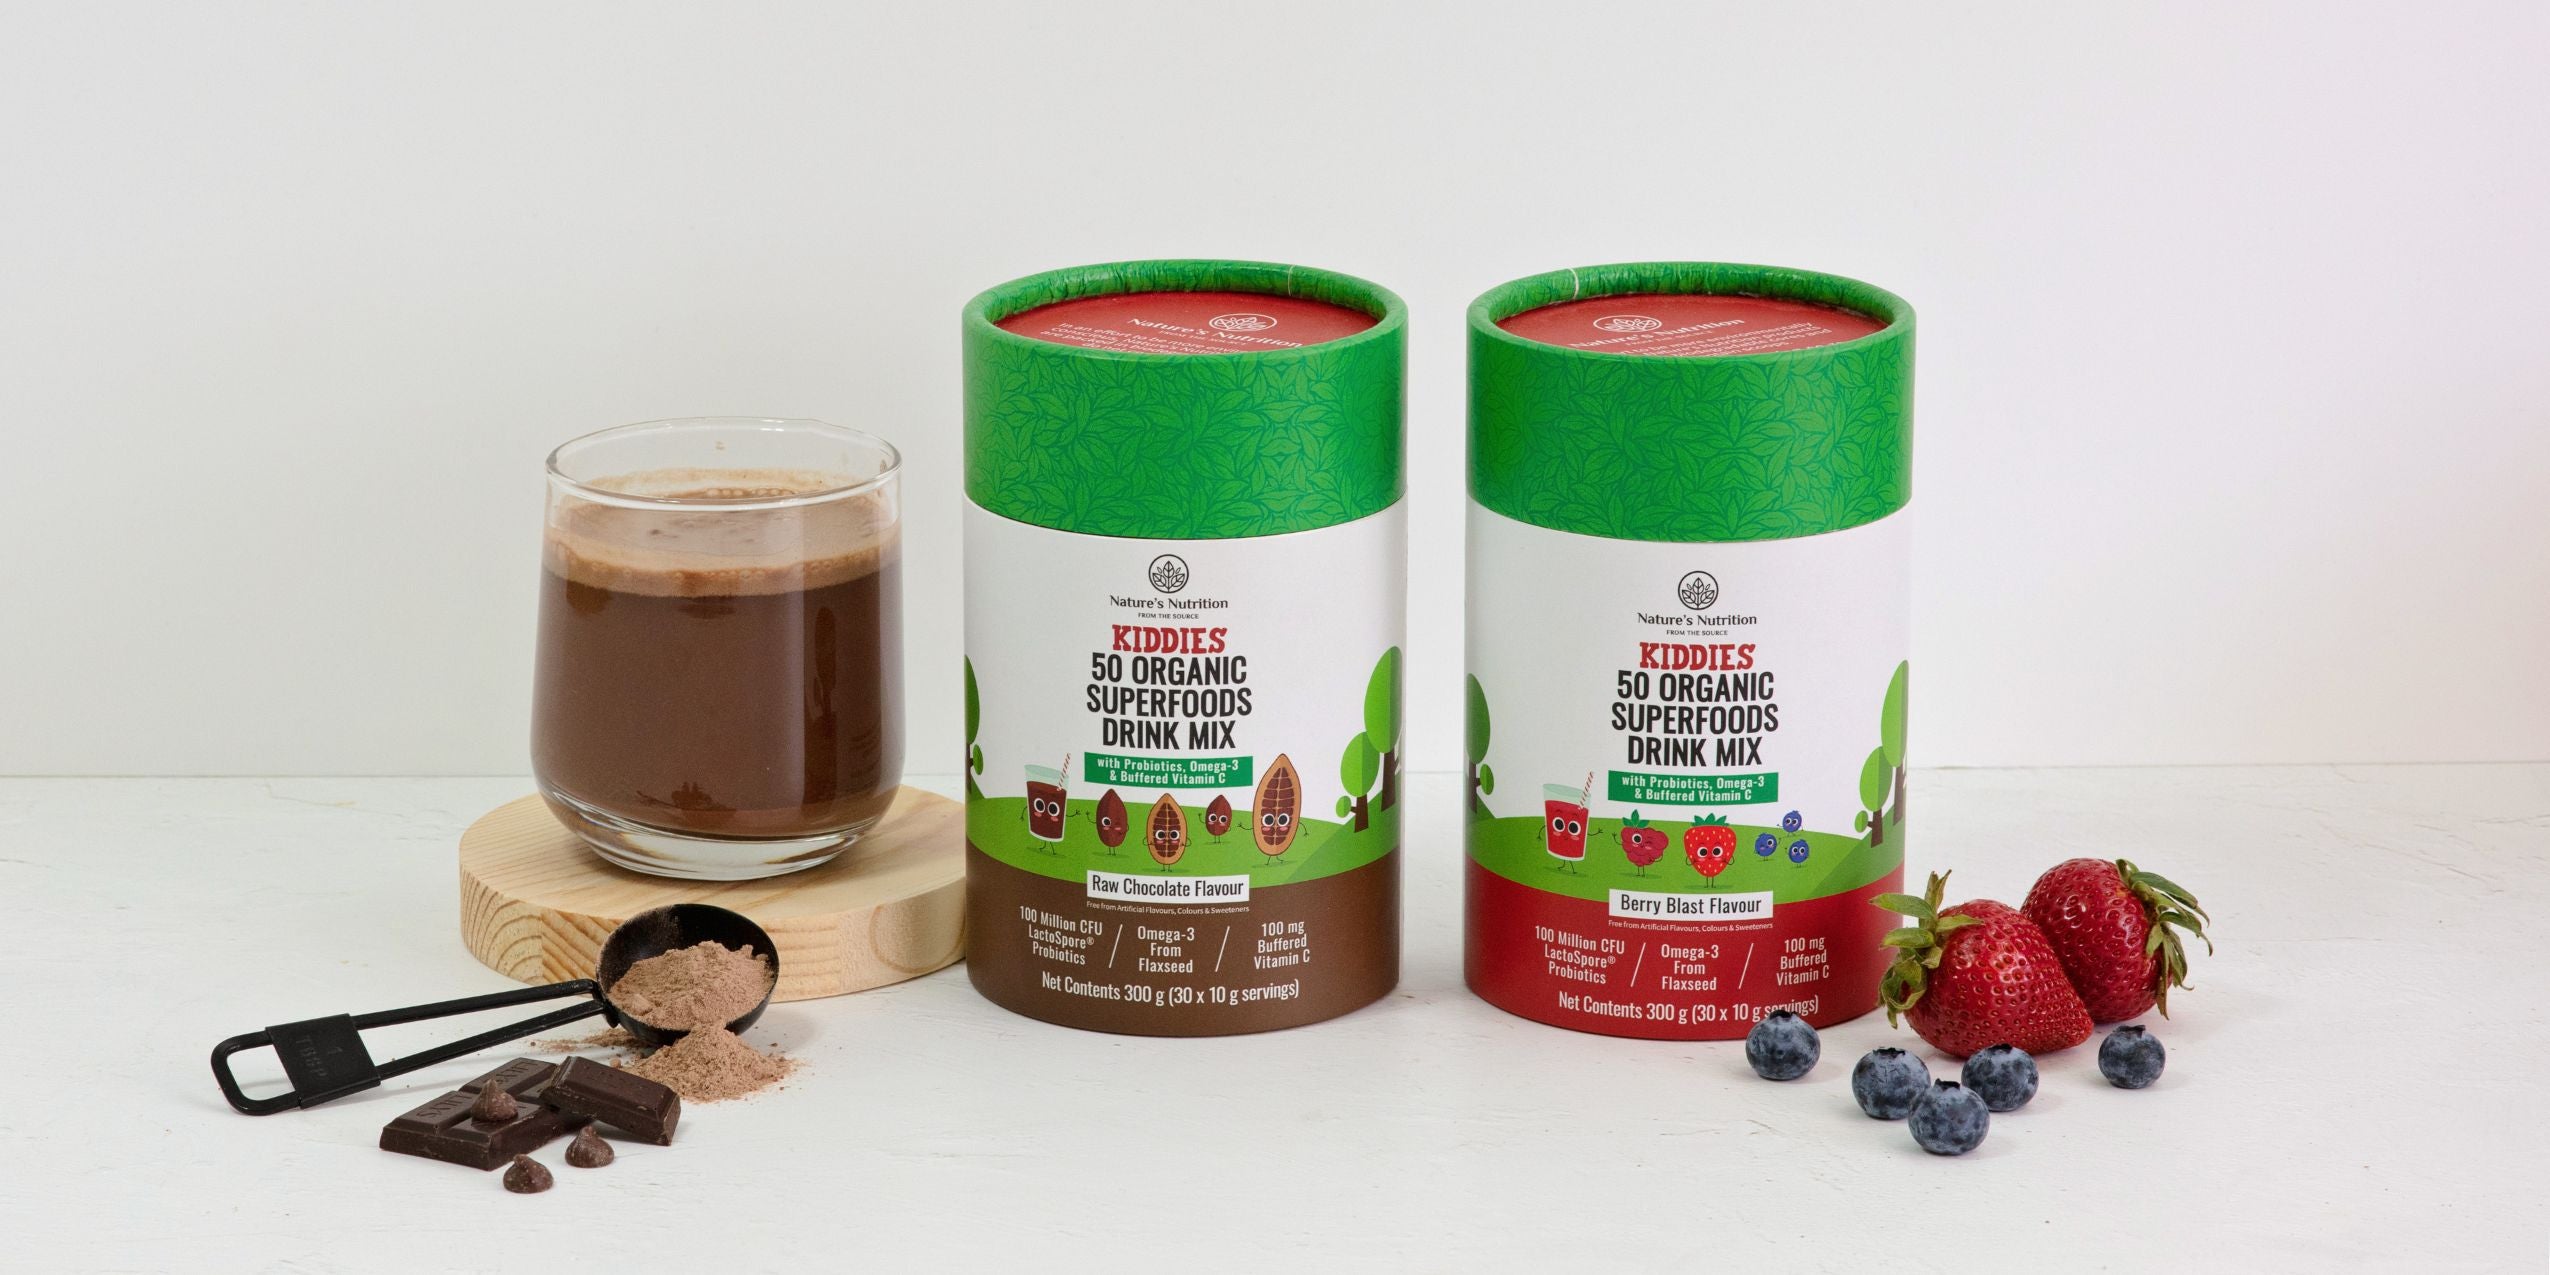 Kiddies 50 Organic Superfoods Drink Mix Chocolate and Berry Flavour